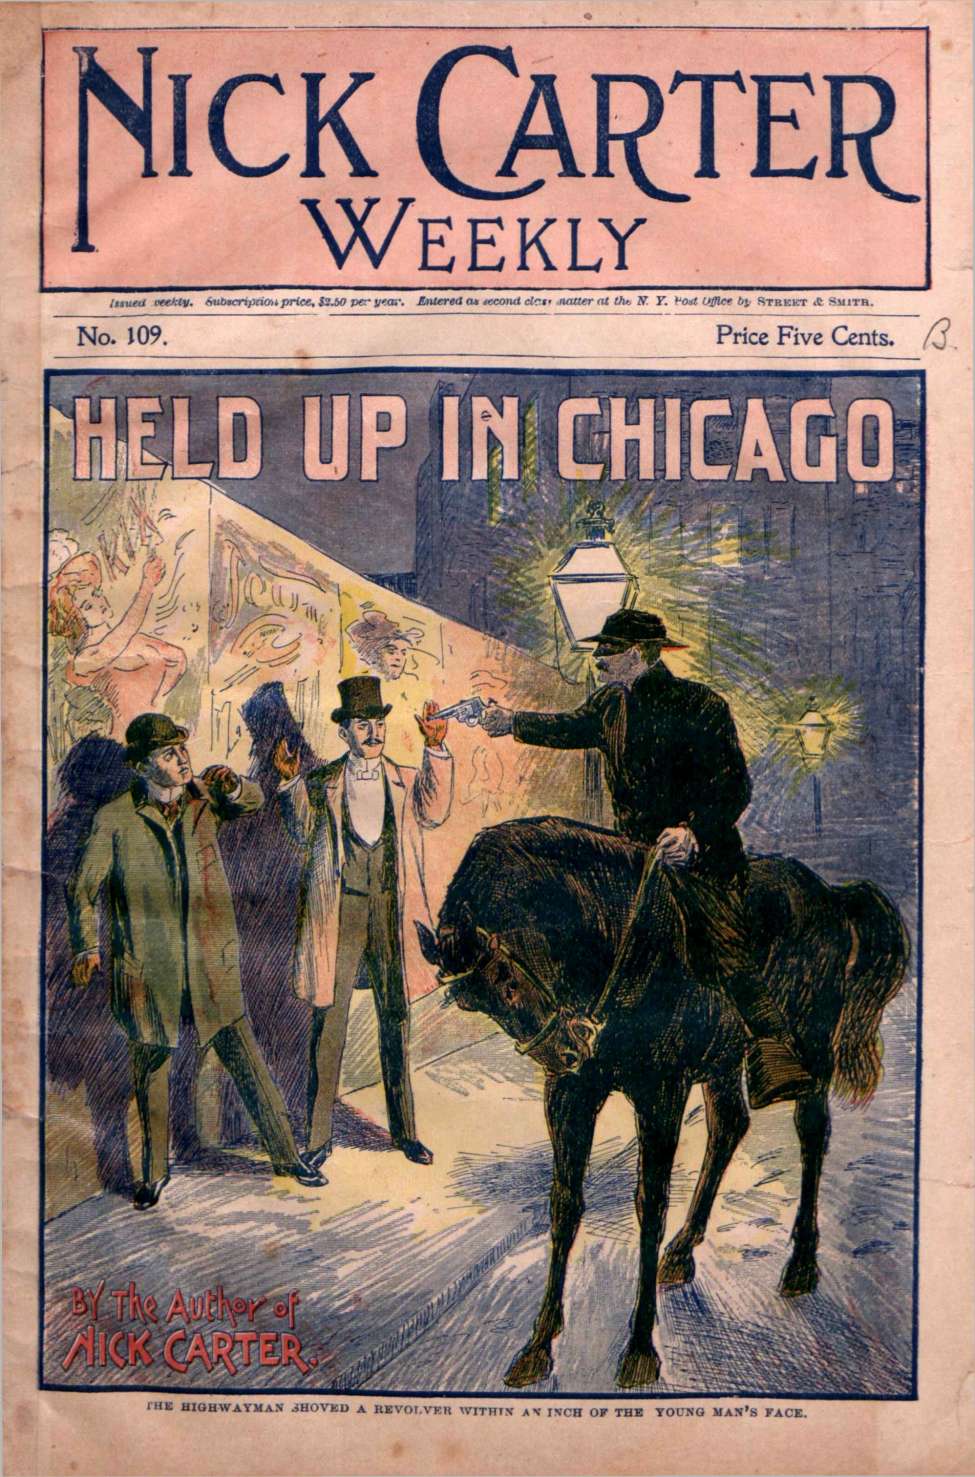 Book Cover For Nick Carter Weekly 109 - Held Up In Chicago